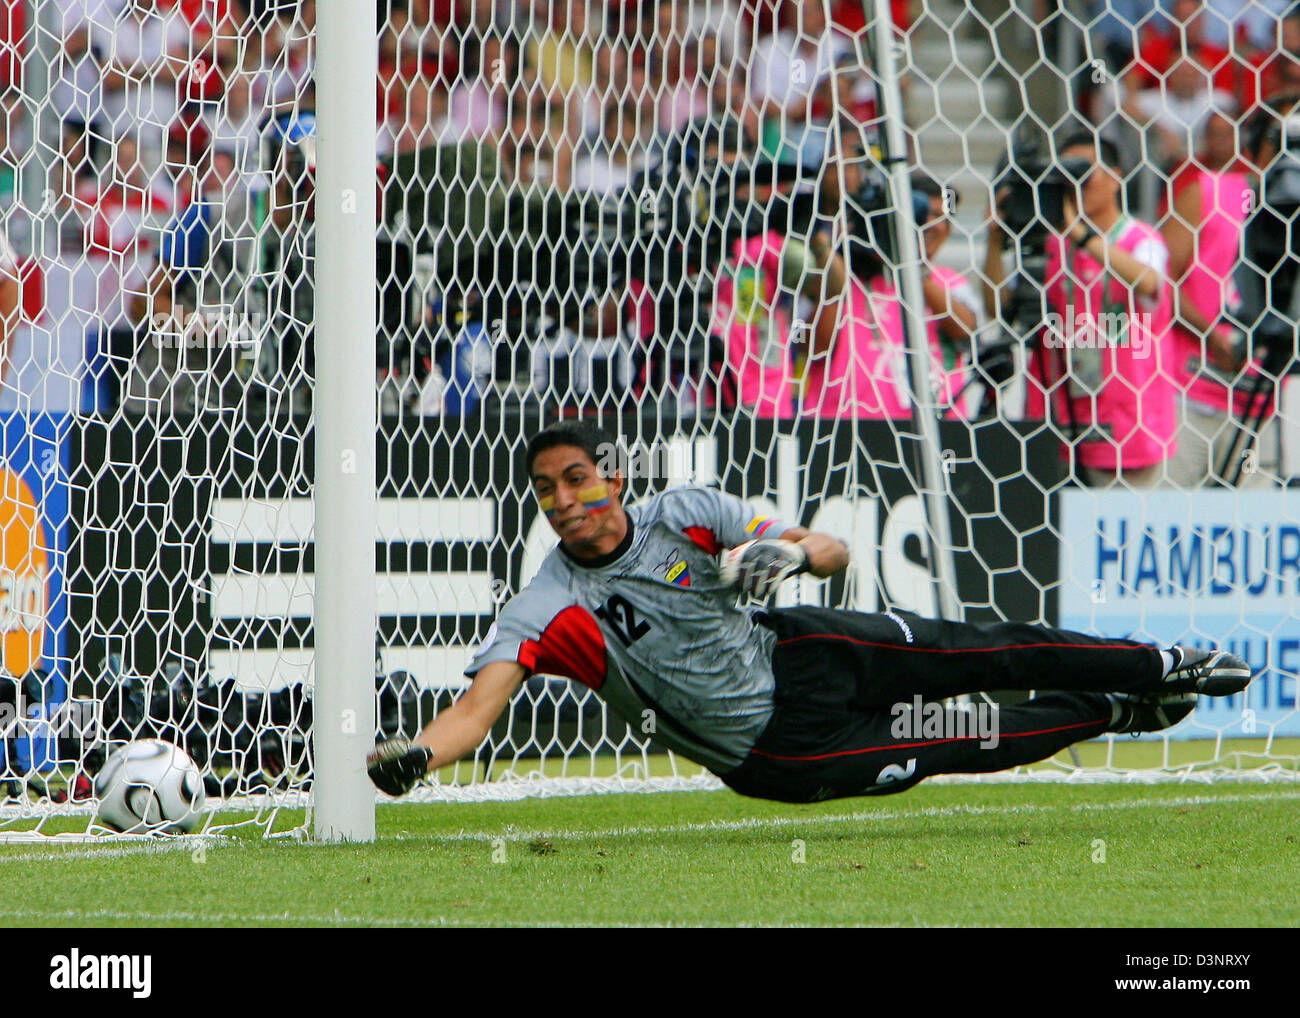 David Beckham (not pictured) of England scores the 1-0 lead against goalkeeper of Ecuador Cristian Mora during the 2nd round match of the 2006 FIFA World Cup between England and Ecuador in Stuttgart, Germany, Sunday, 25 June 2006. DPA/ARNE DEDERT +++ Mobile Services OUT +++ Please refer to FIFA's terms and conditions Stock Photo